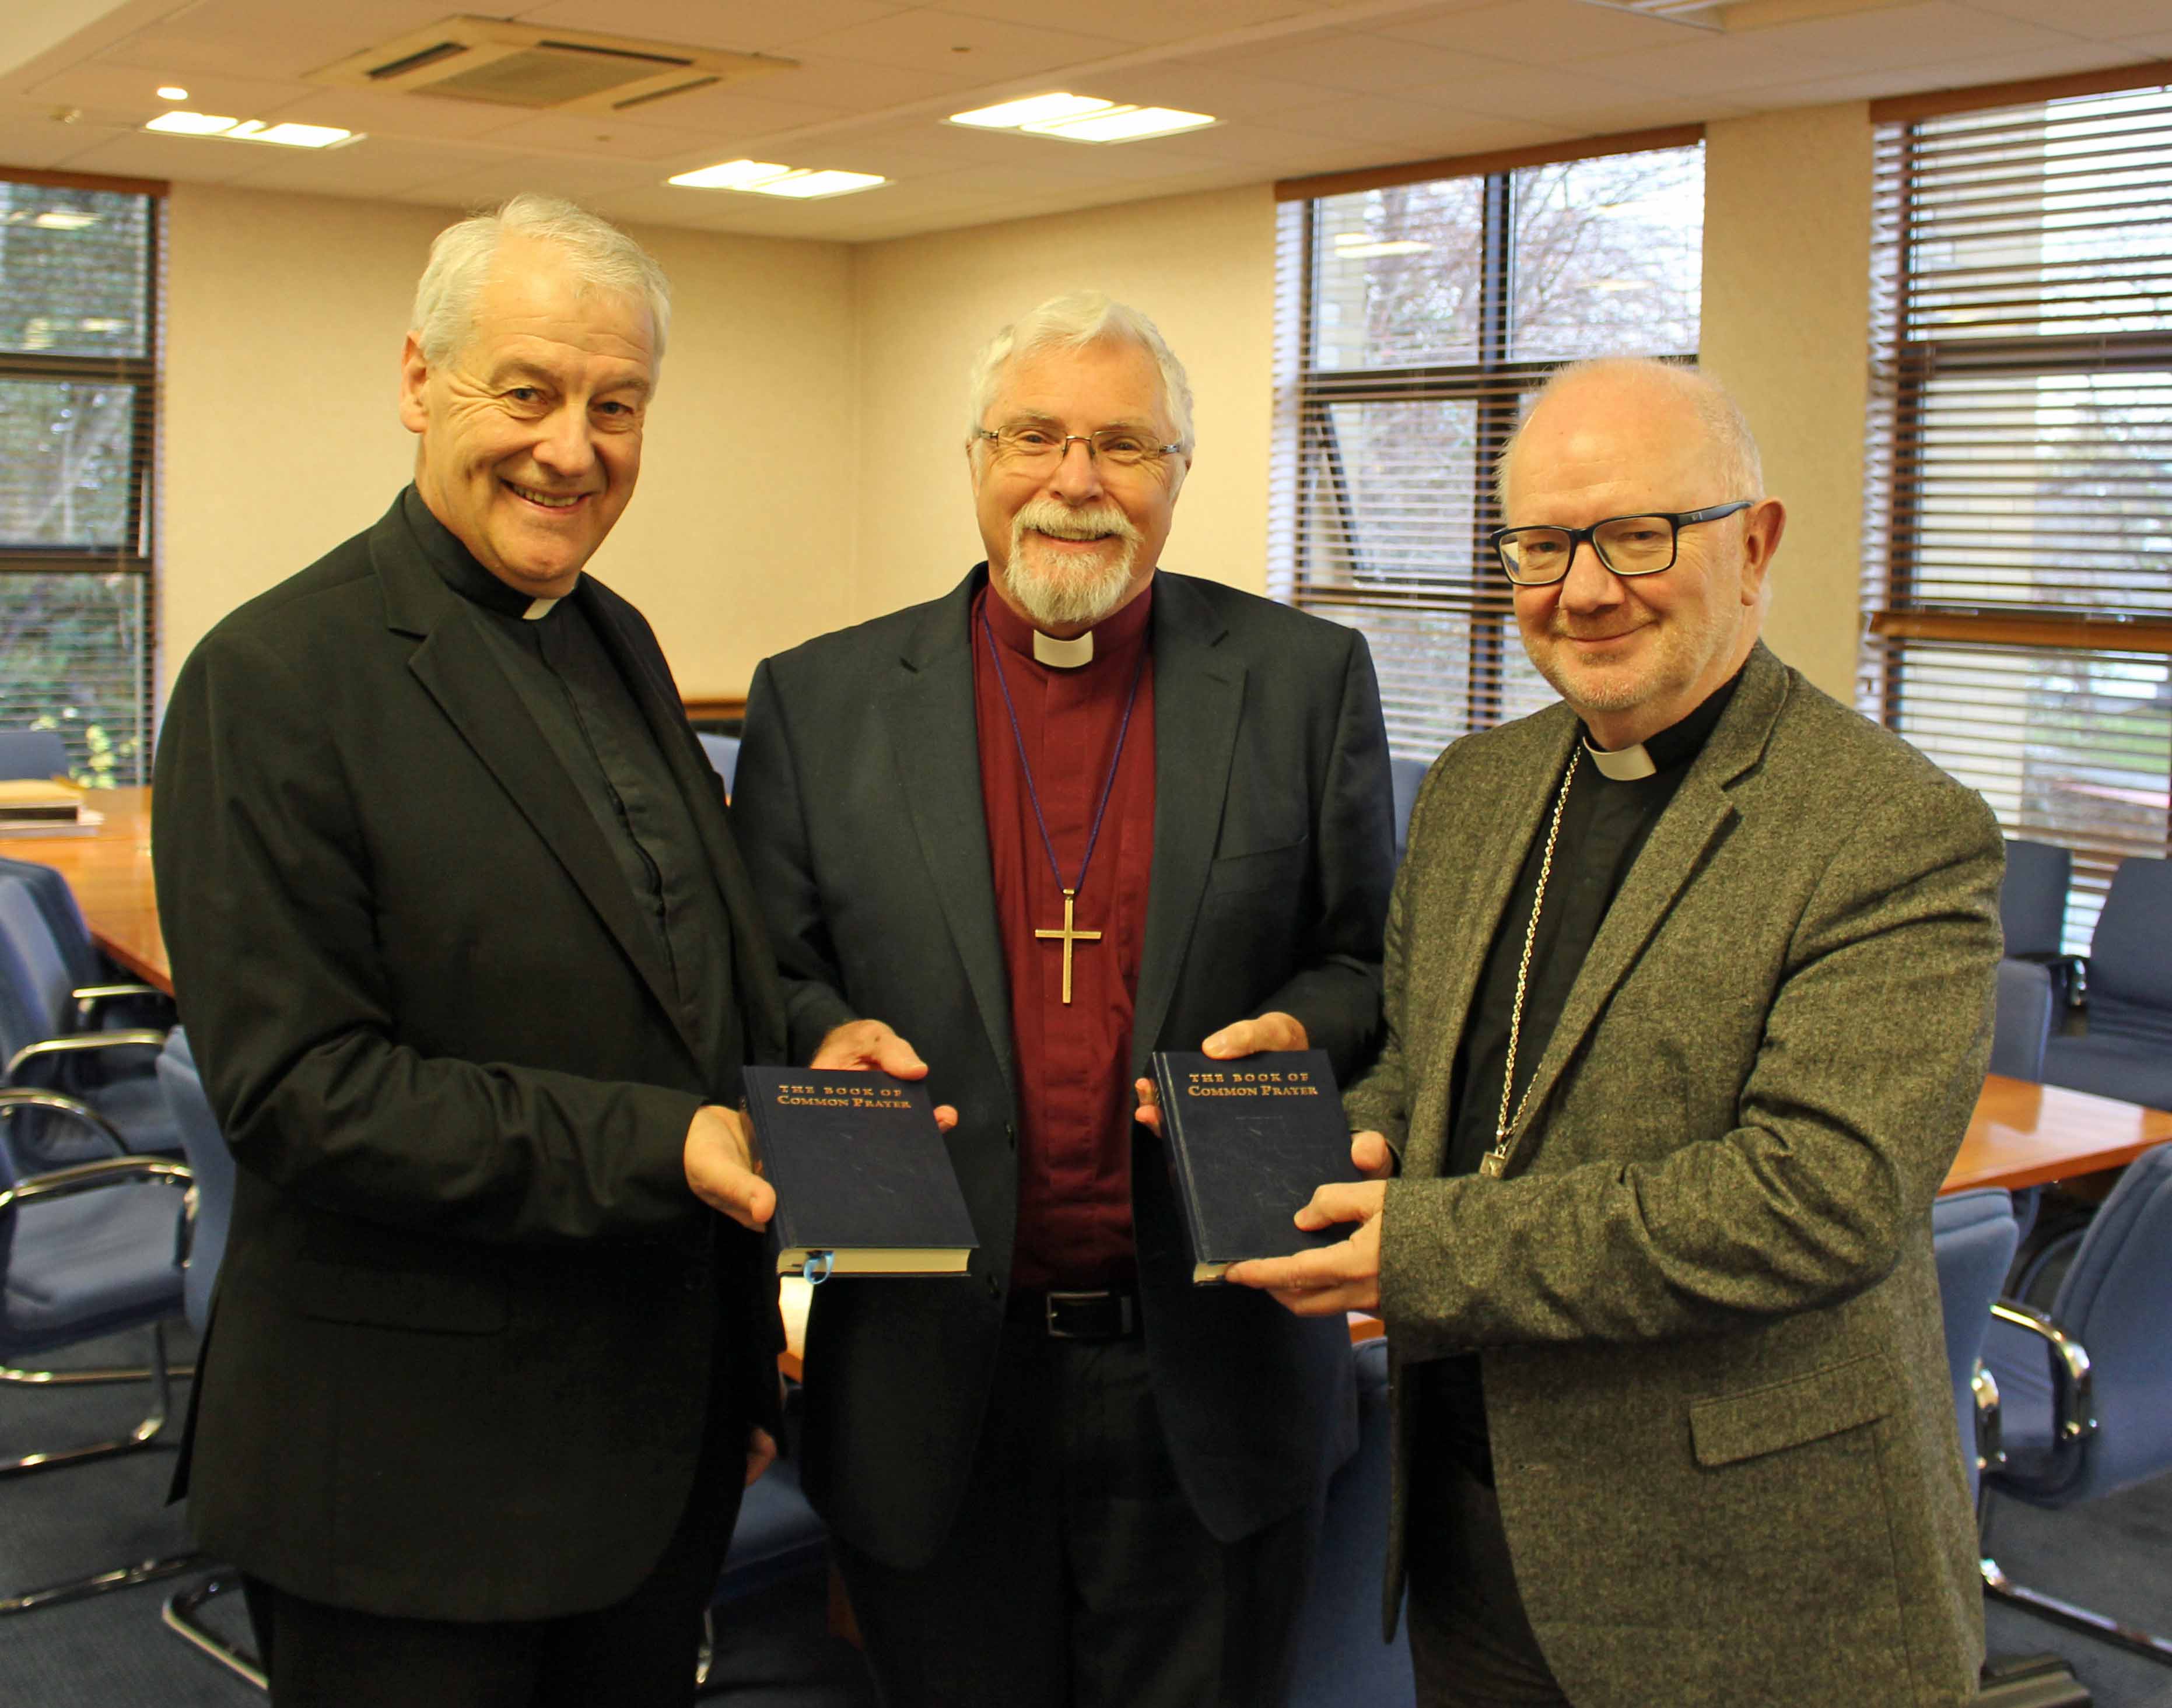 Bishop Harold Miller, Chair of the Book of Common Prayer Working Group, presents review copies of the revised Book of Common Prayer, to the Archbishop of Armagh and the Archbishop of Dublin.